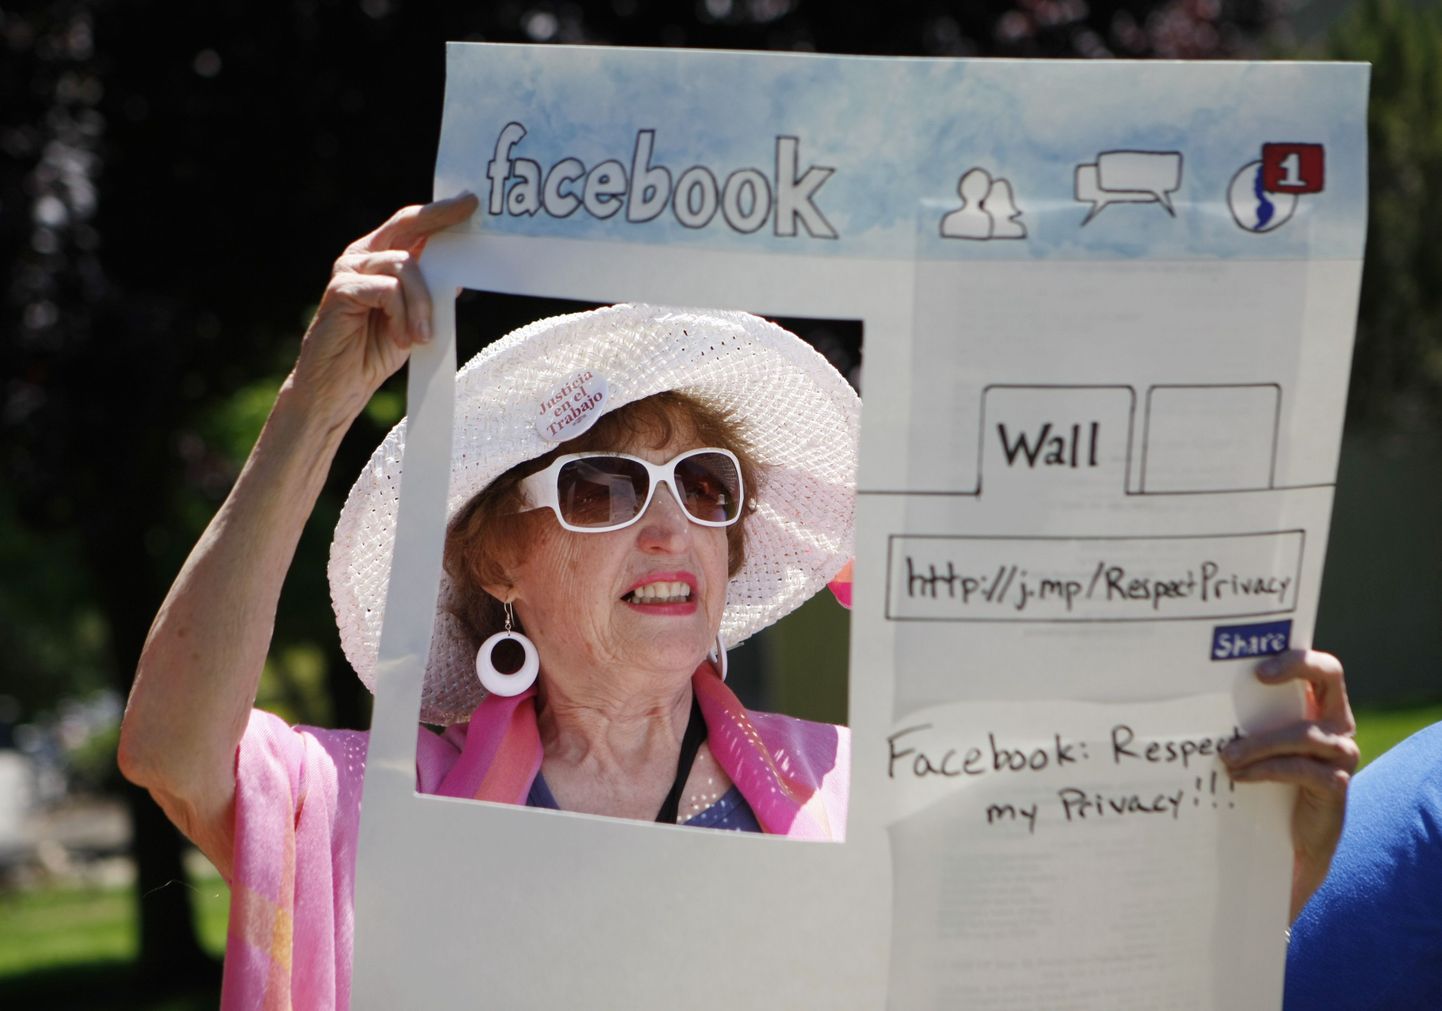 Gail Sredanovic, of Raging Grannies, protests Facebook's privacy issues, Friday, June 4, 2010, outside Facebook headquarters in Palo Alto, Calif. (AP Photo/Paul Sakuma) / SCANPIX Code: 436